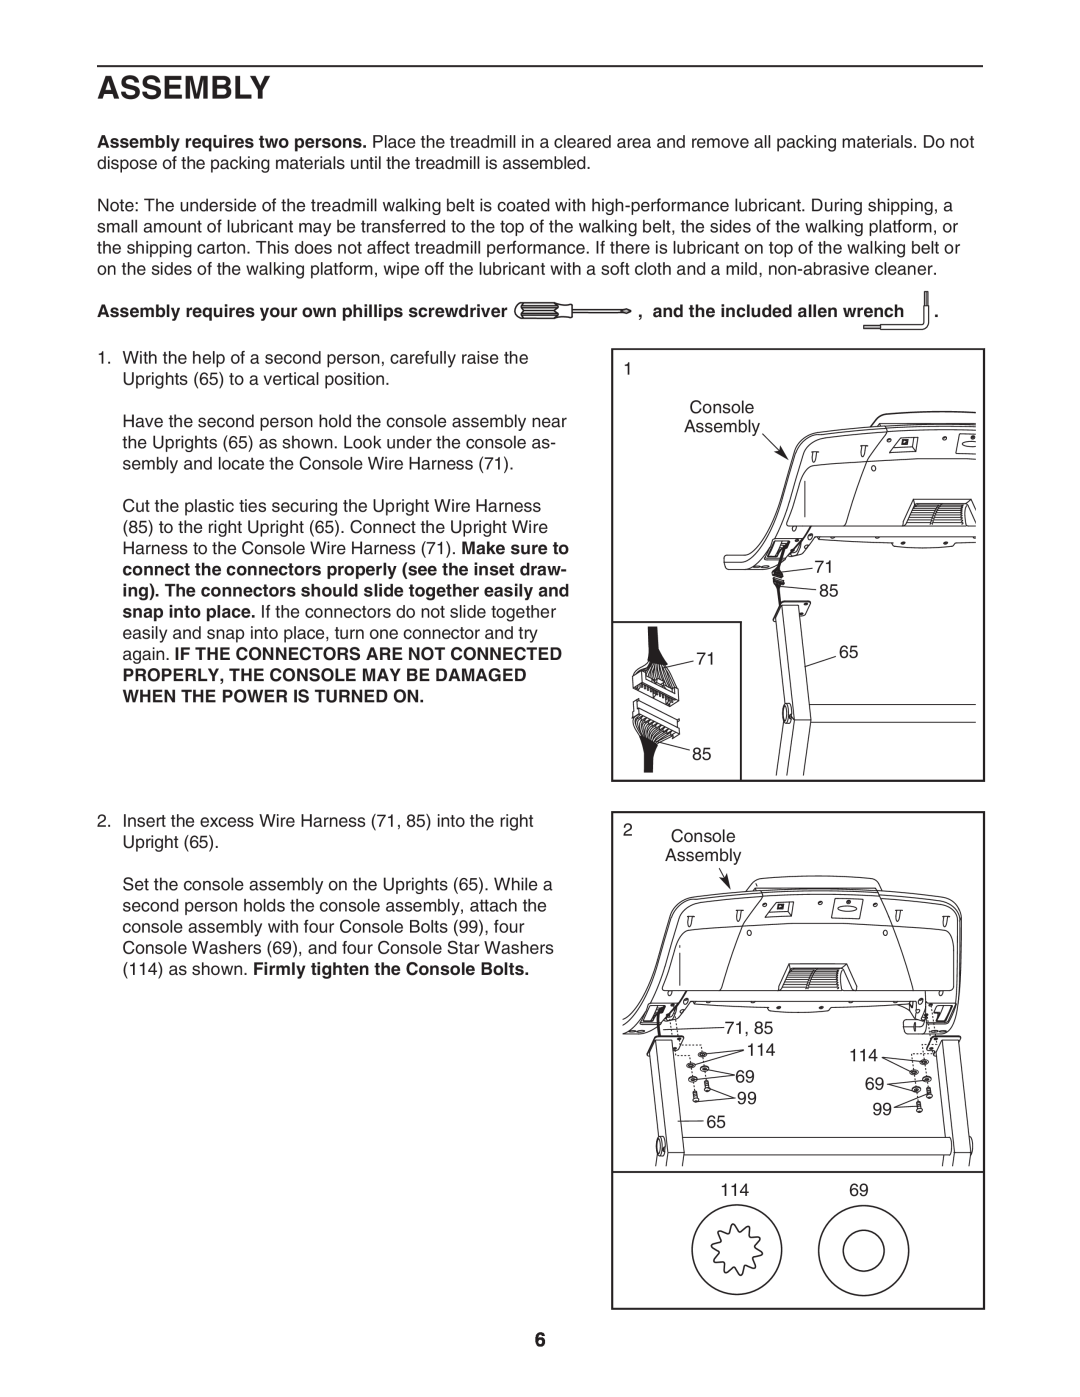 ProForm DTL73942 user manual Assembly, Properly, The Console May Be Damaged When The Power Is Turned On 